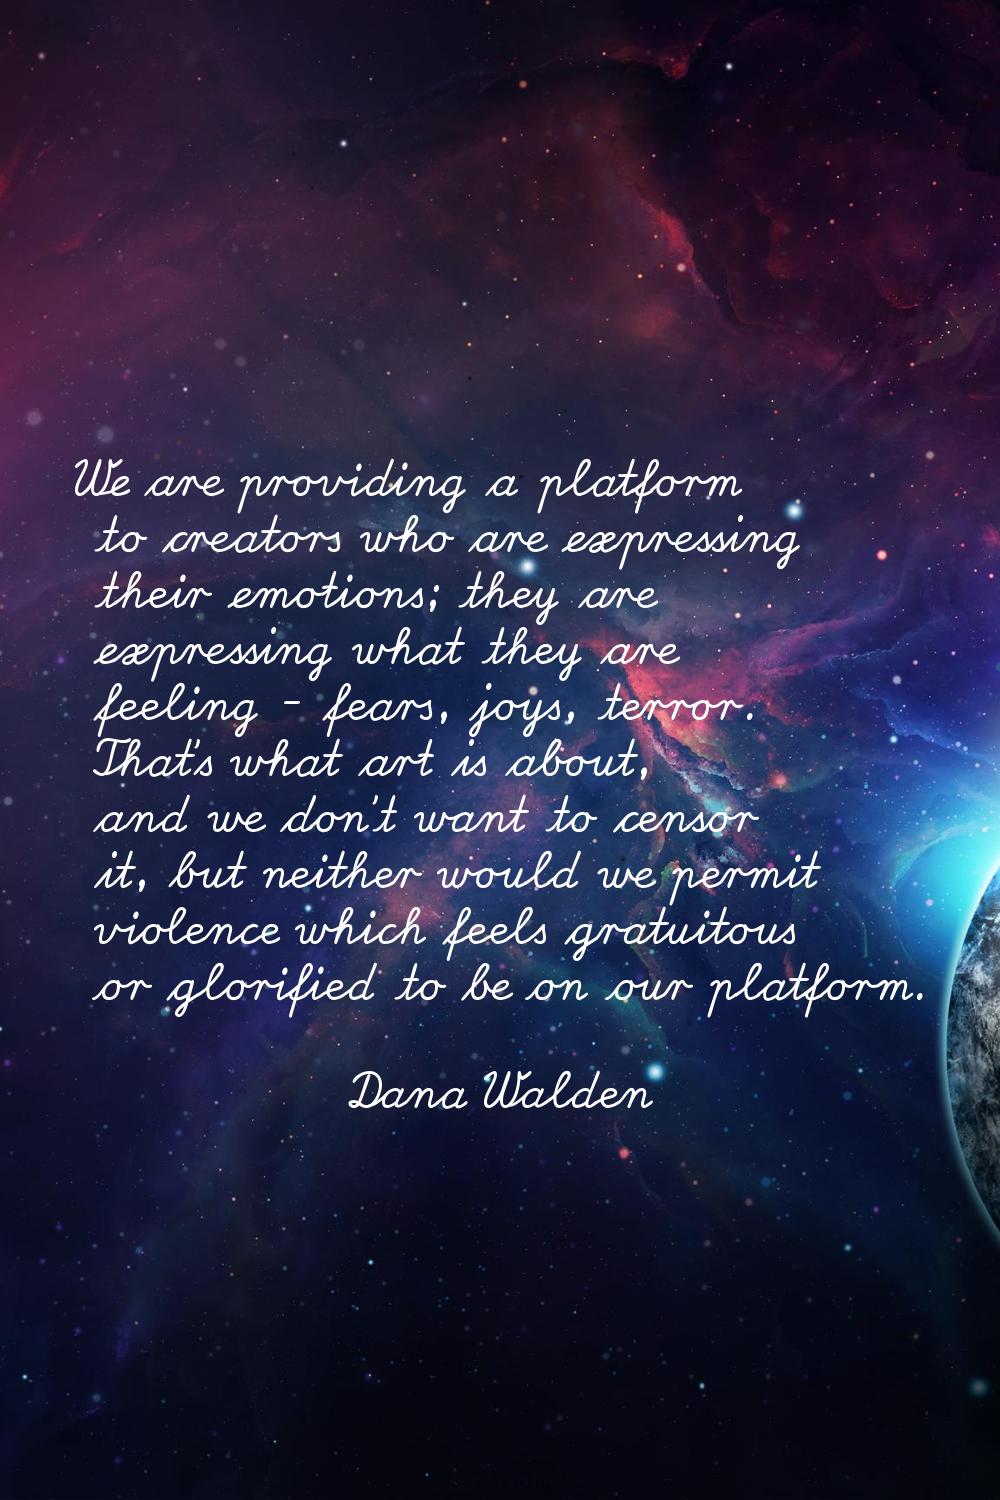 We are providing a platform to creators who are expressing their emotions; they are expressing what